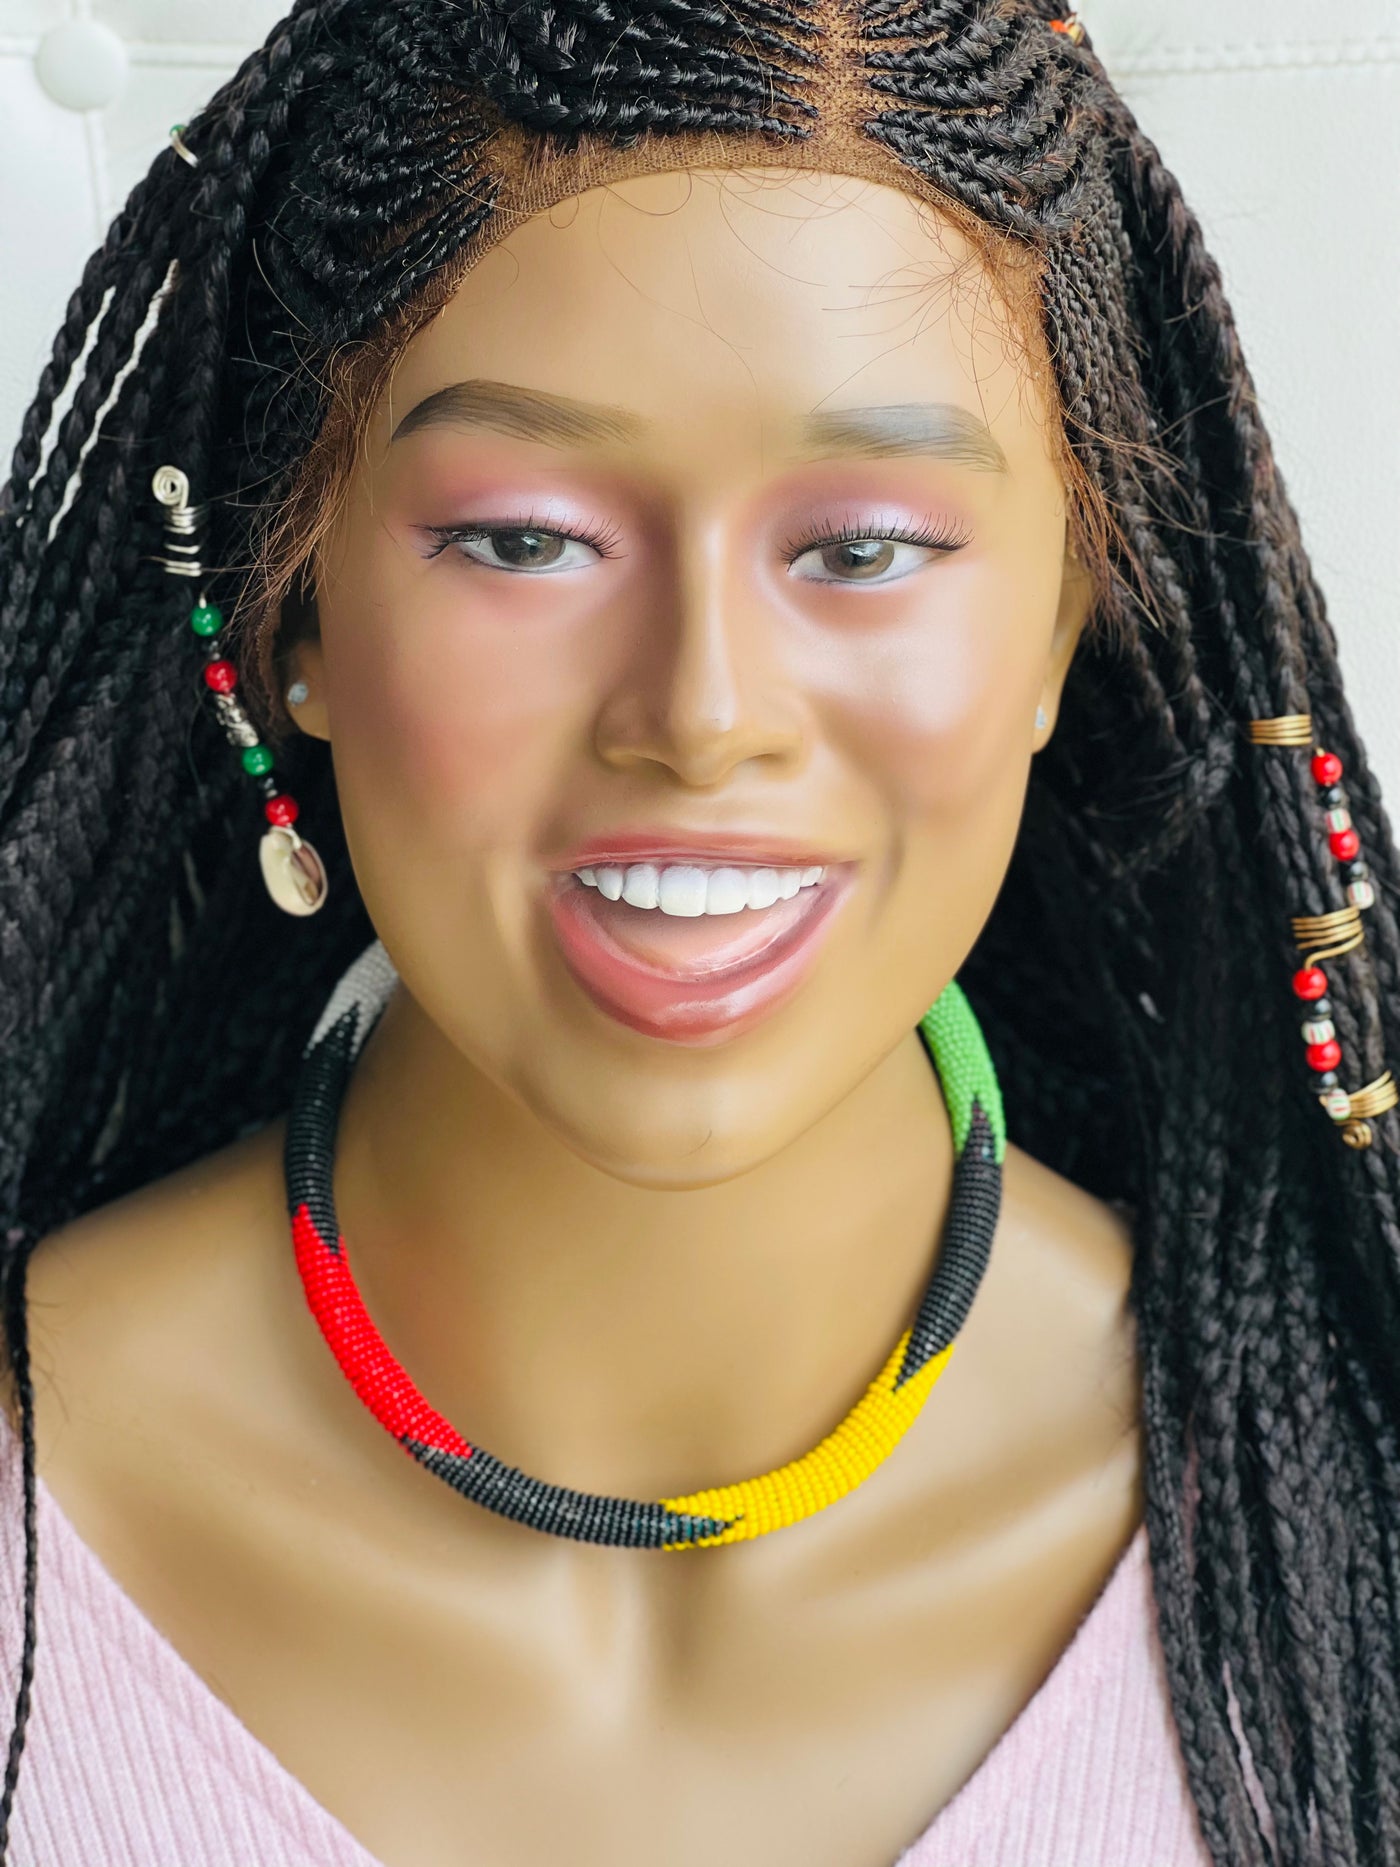 Handcrafted African Woman Necklace